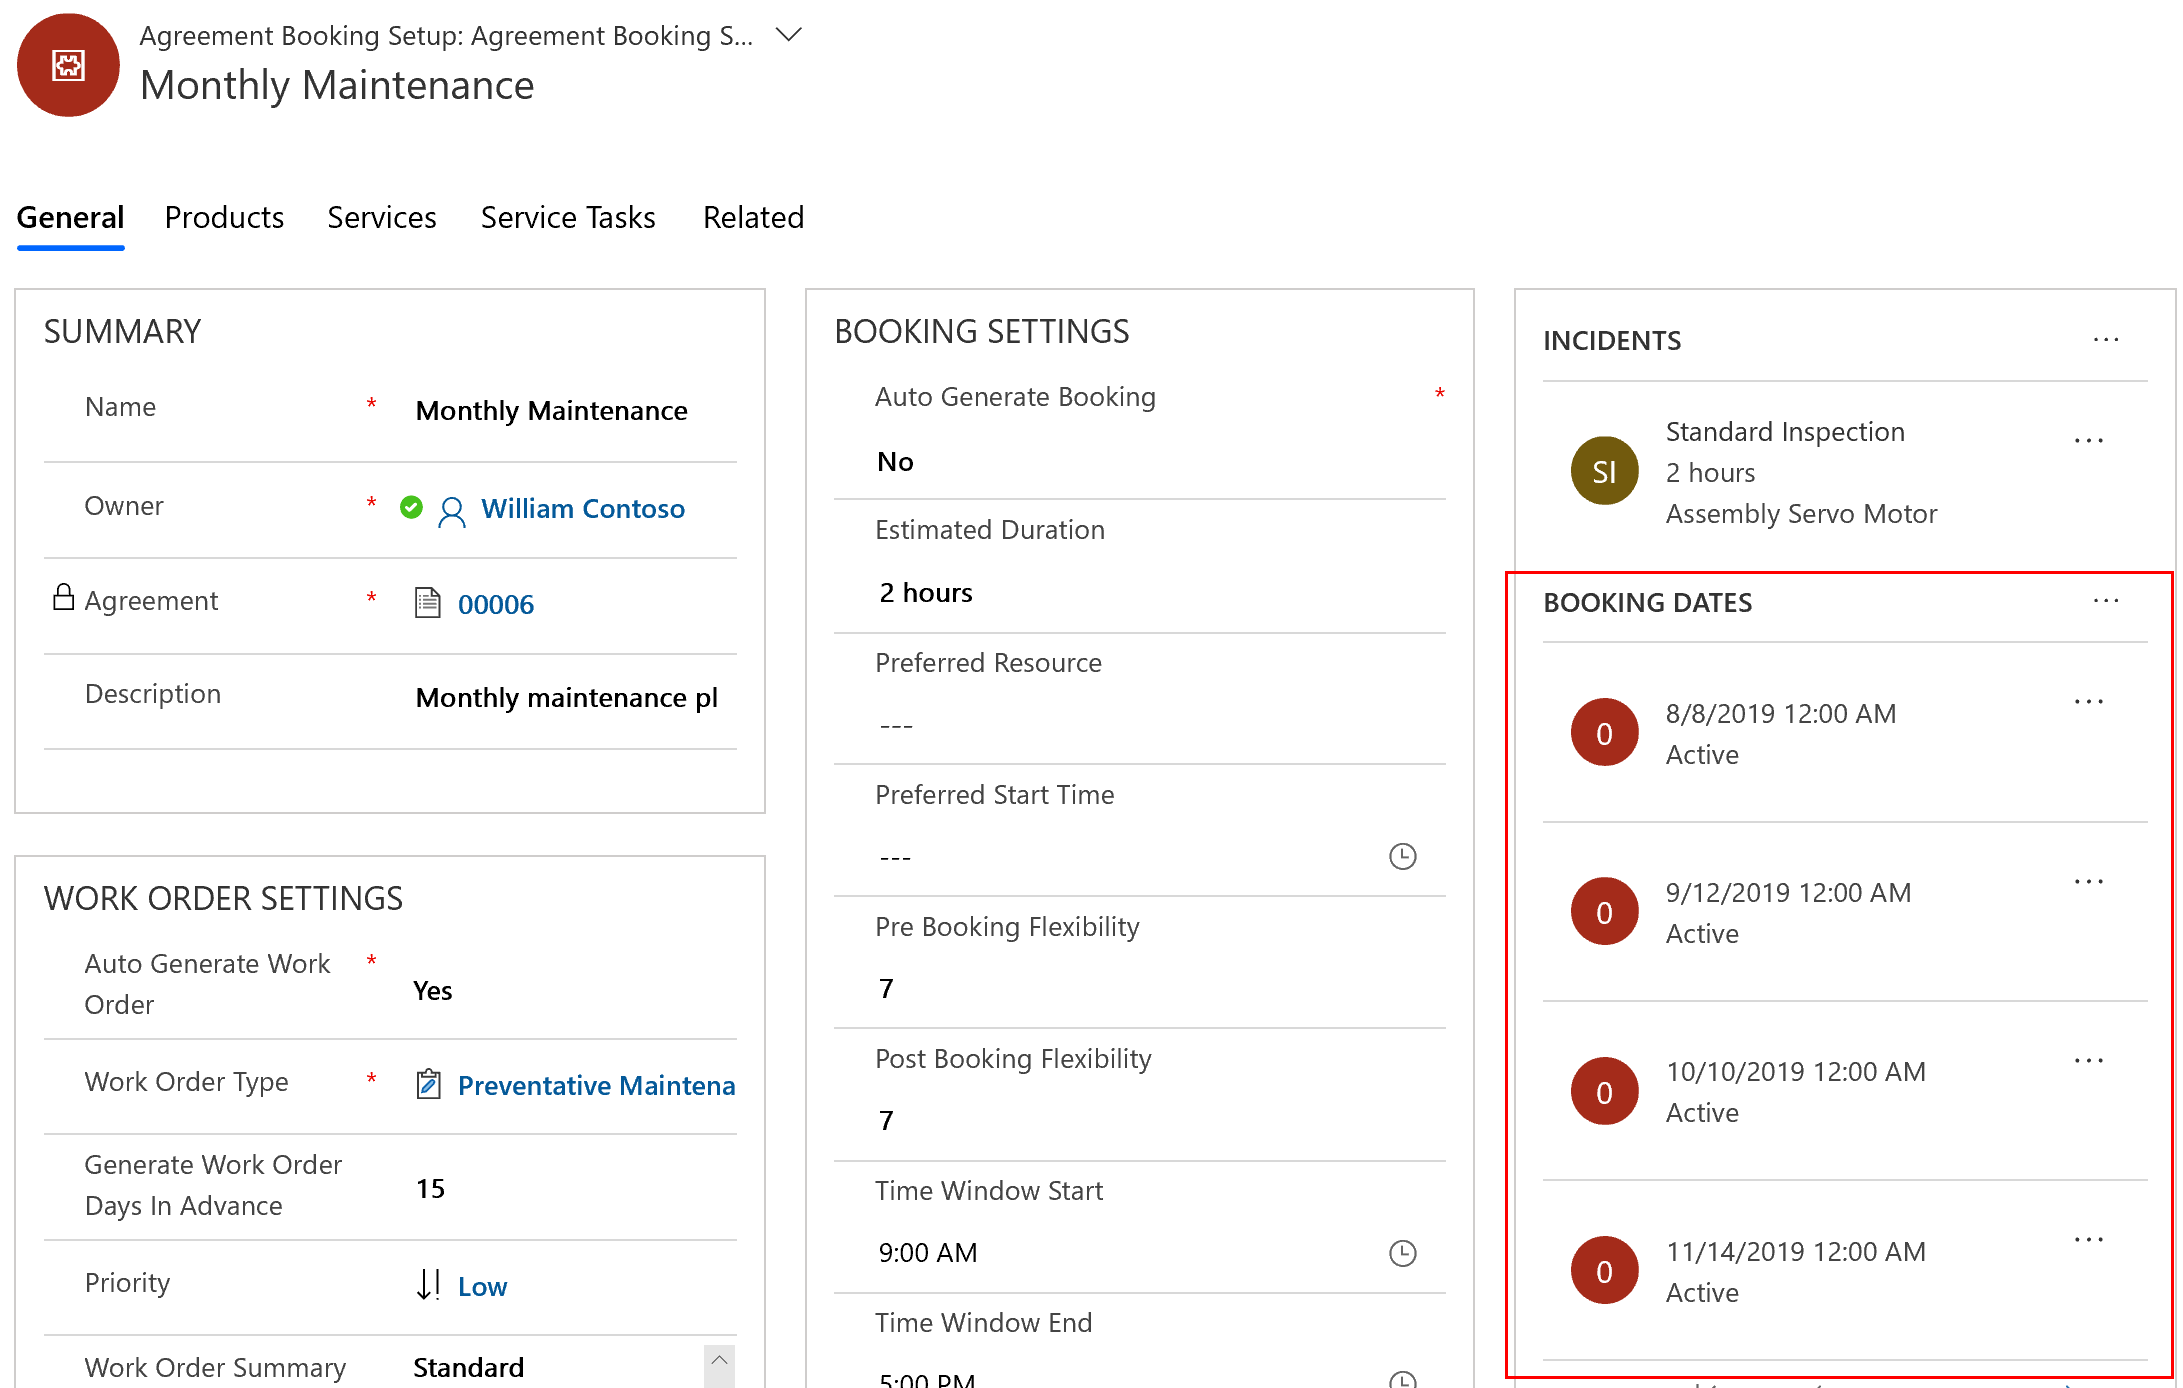 Screenshot of the same agreement booking setup, showing the booking dates options that have appeared.